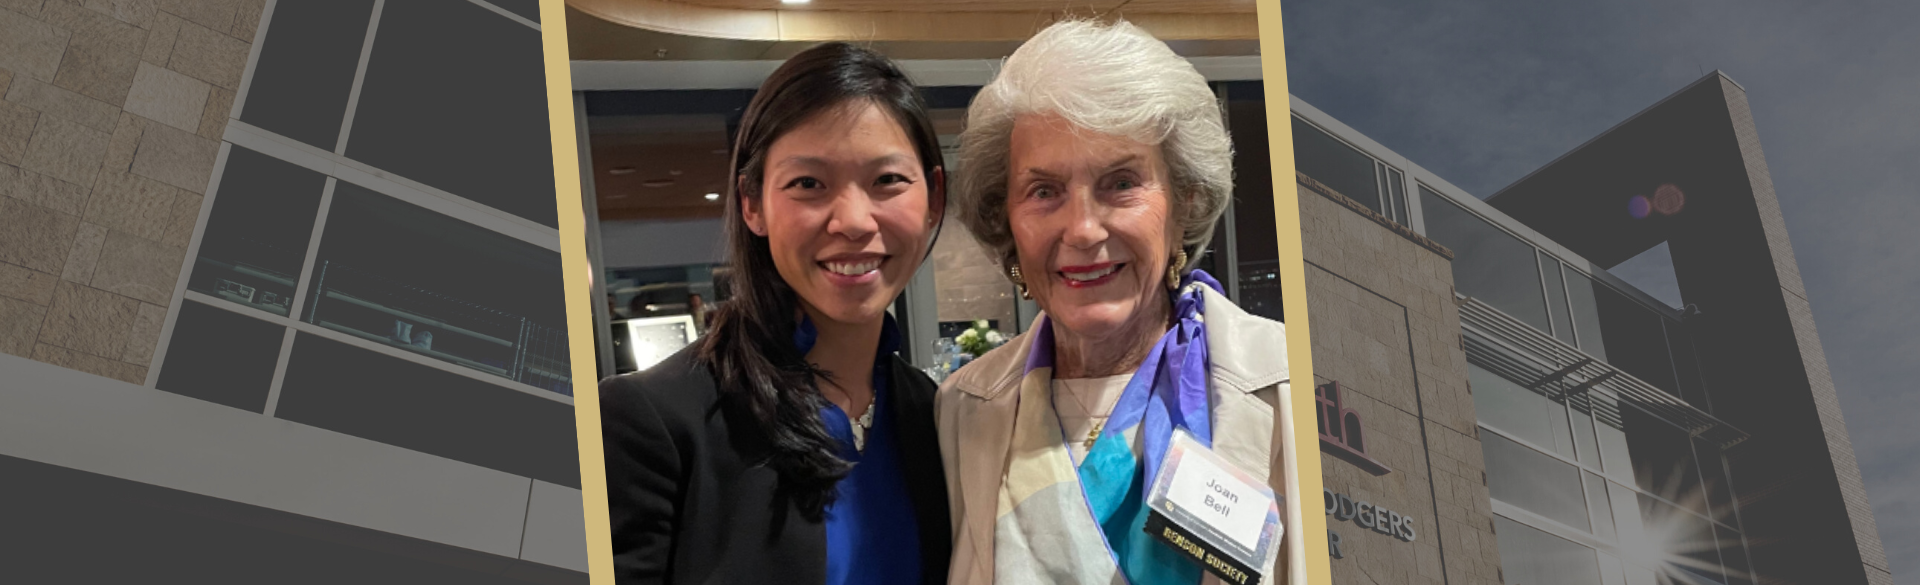 Sophie Liao, MD, poses with Joan Bell, wife of Robert Bell, who inspired an endowed chair award.